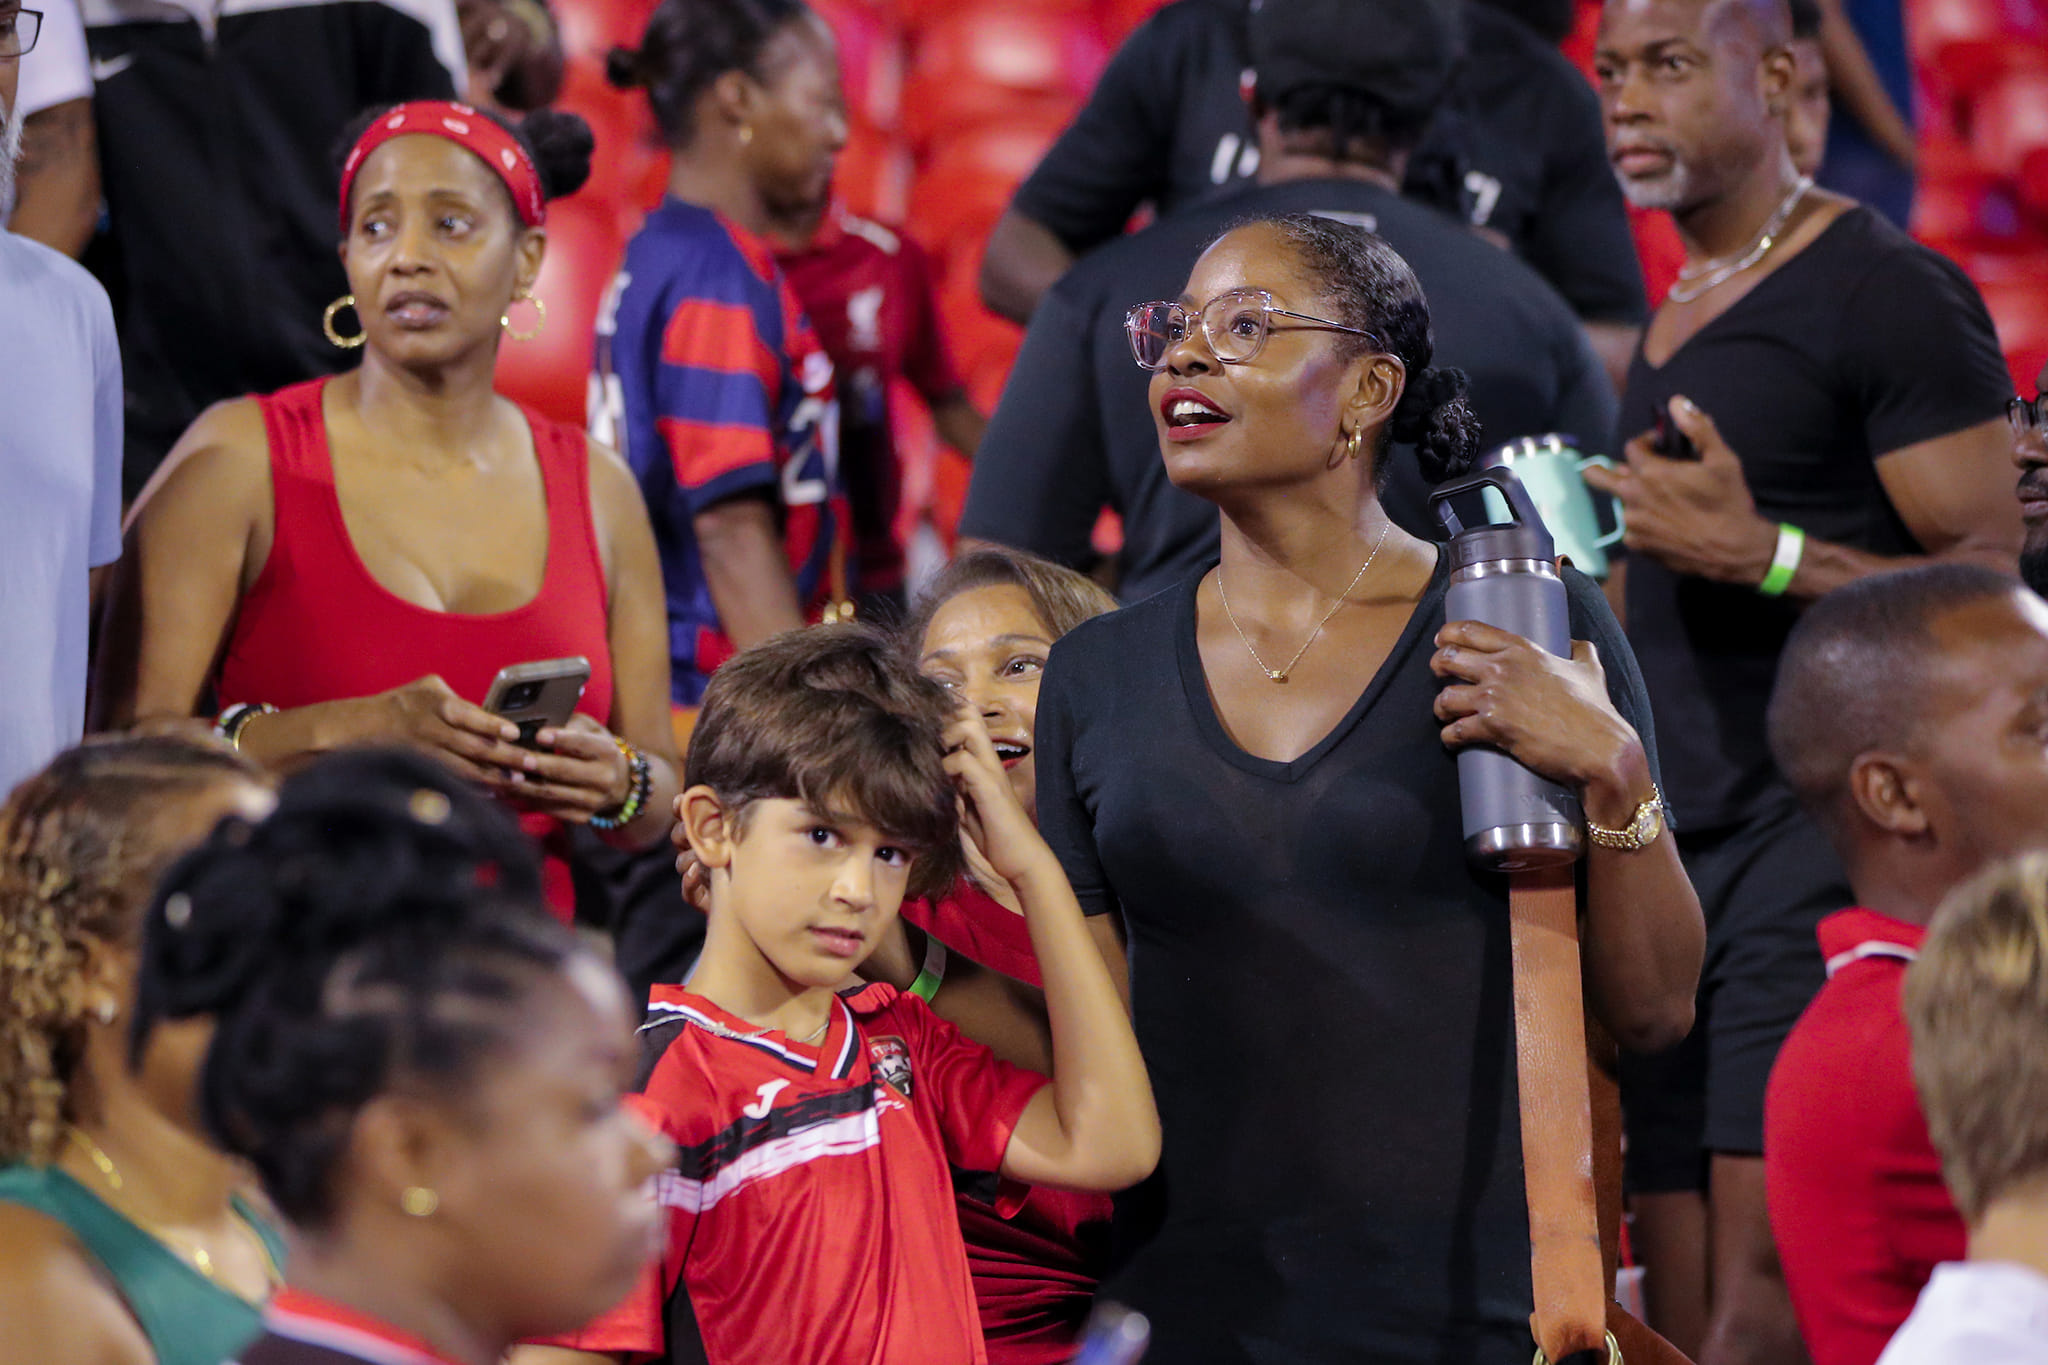 Former Miss Universe Wendy Fitzwilliam at the T&T U20 match against Dominica on Sunday at the Hasely Crawford Stadium. Her son, Ailan Panton, is the national team's goalkeeper. (Photo credit - TTFA Media) (Image obtained at tt.loopnews.com)